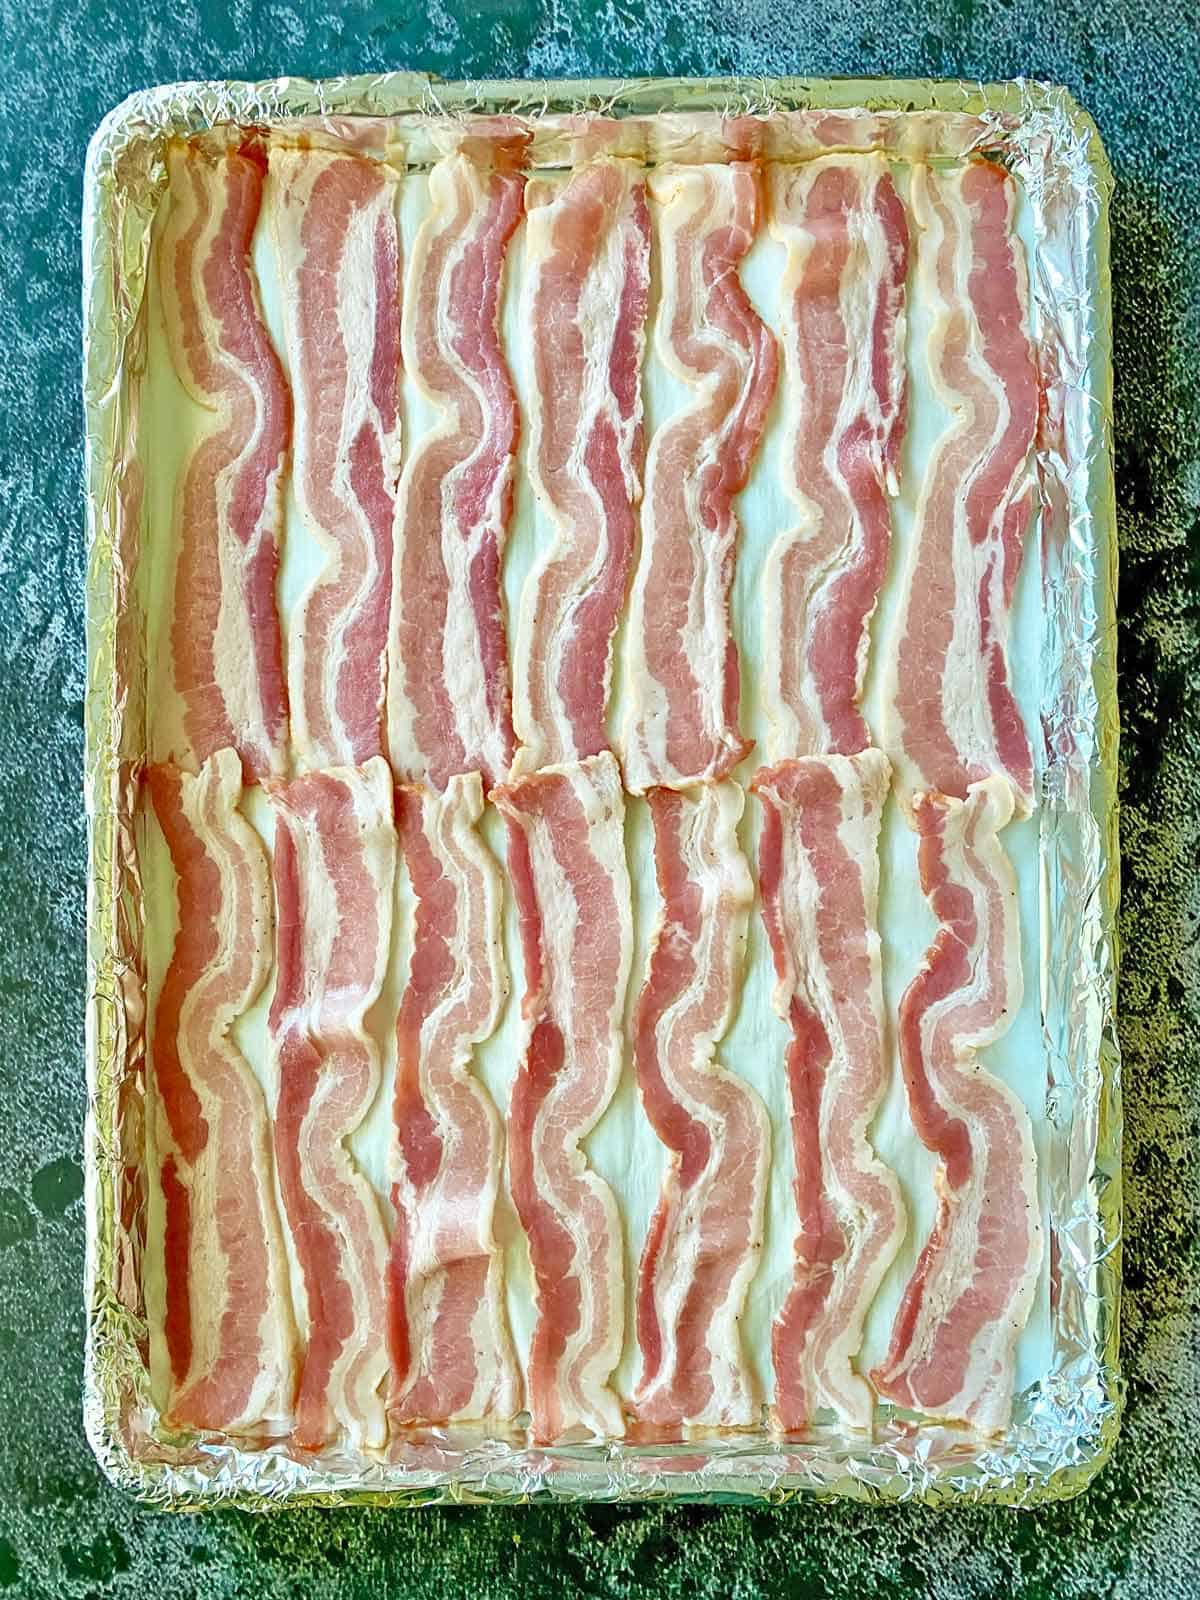 Uncooked bacon strips on a foil lined baking sheet.